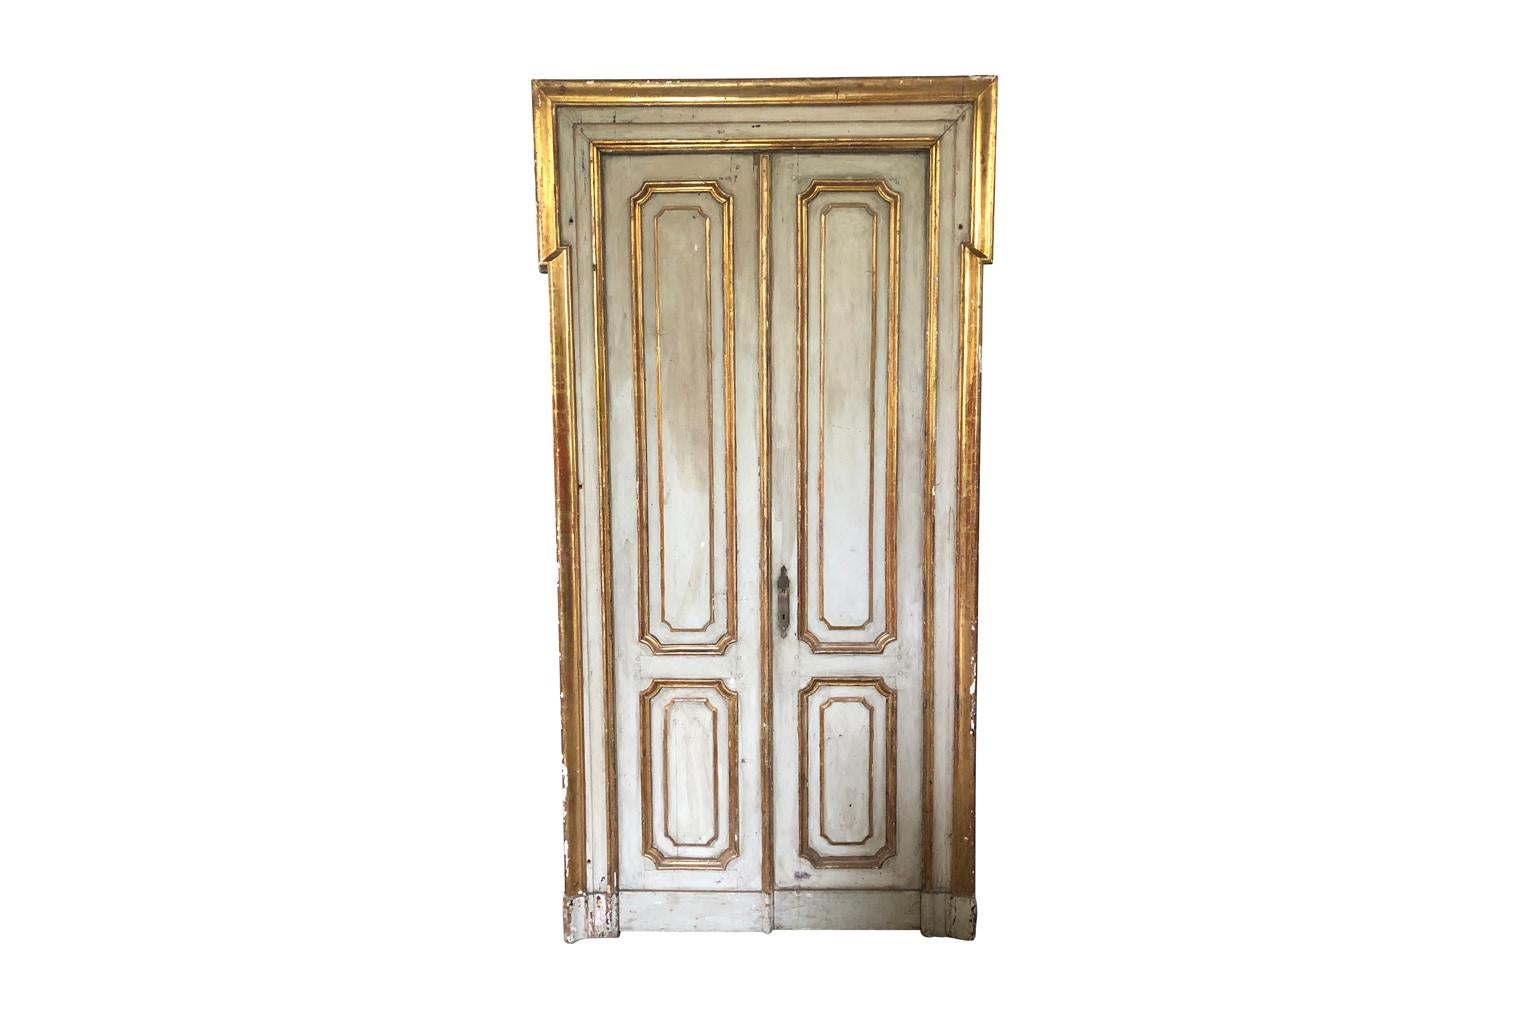 A fantastic pair of mid-19th century Venetian Palazzo Doors in painted and gilt wood. True statement pieces for a sumptuous interior.